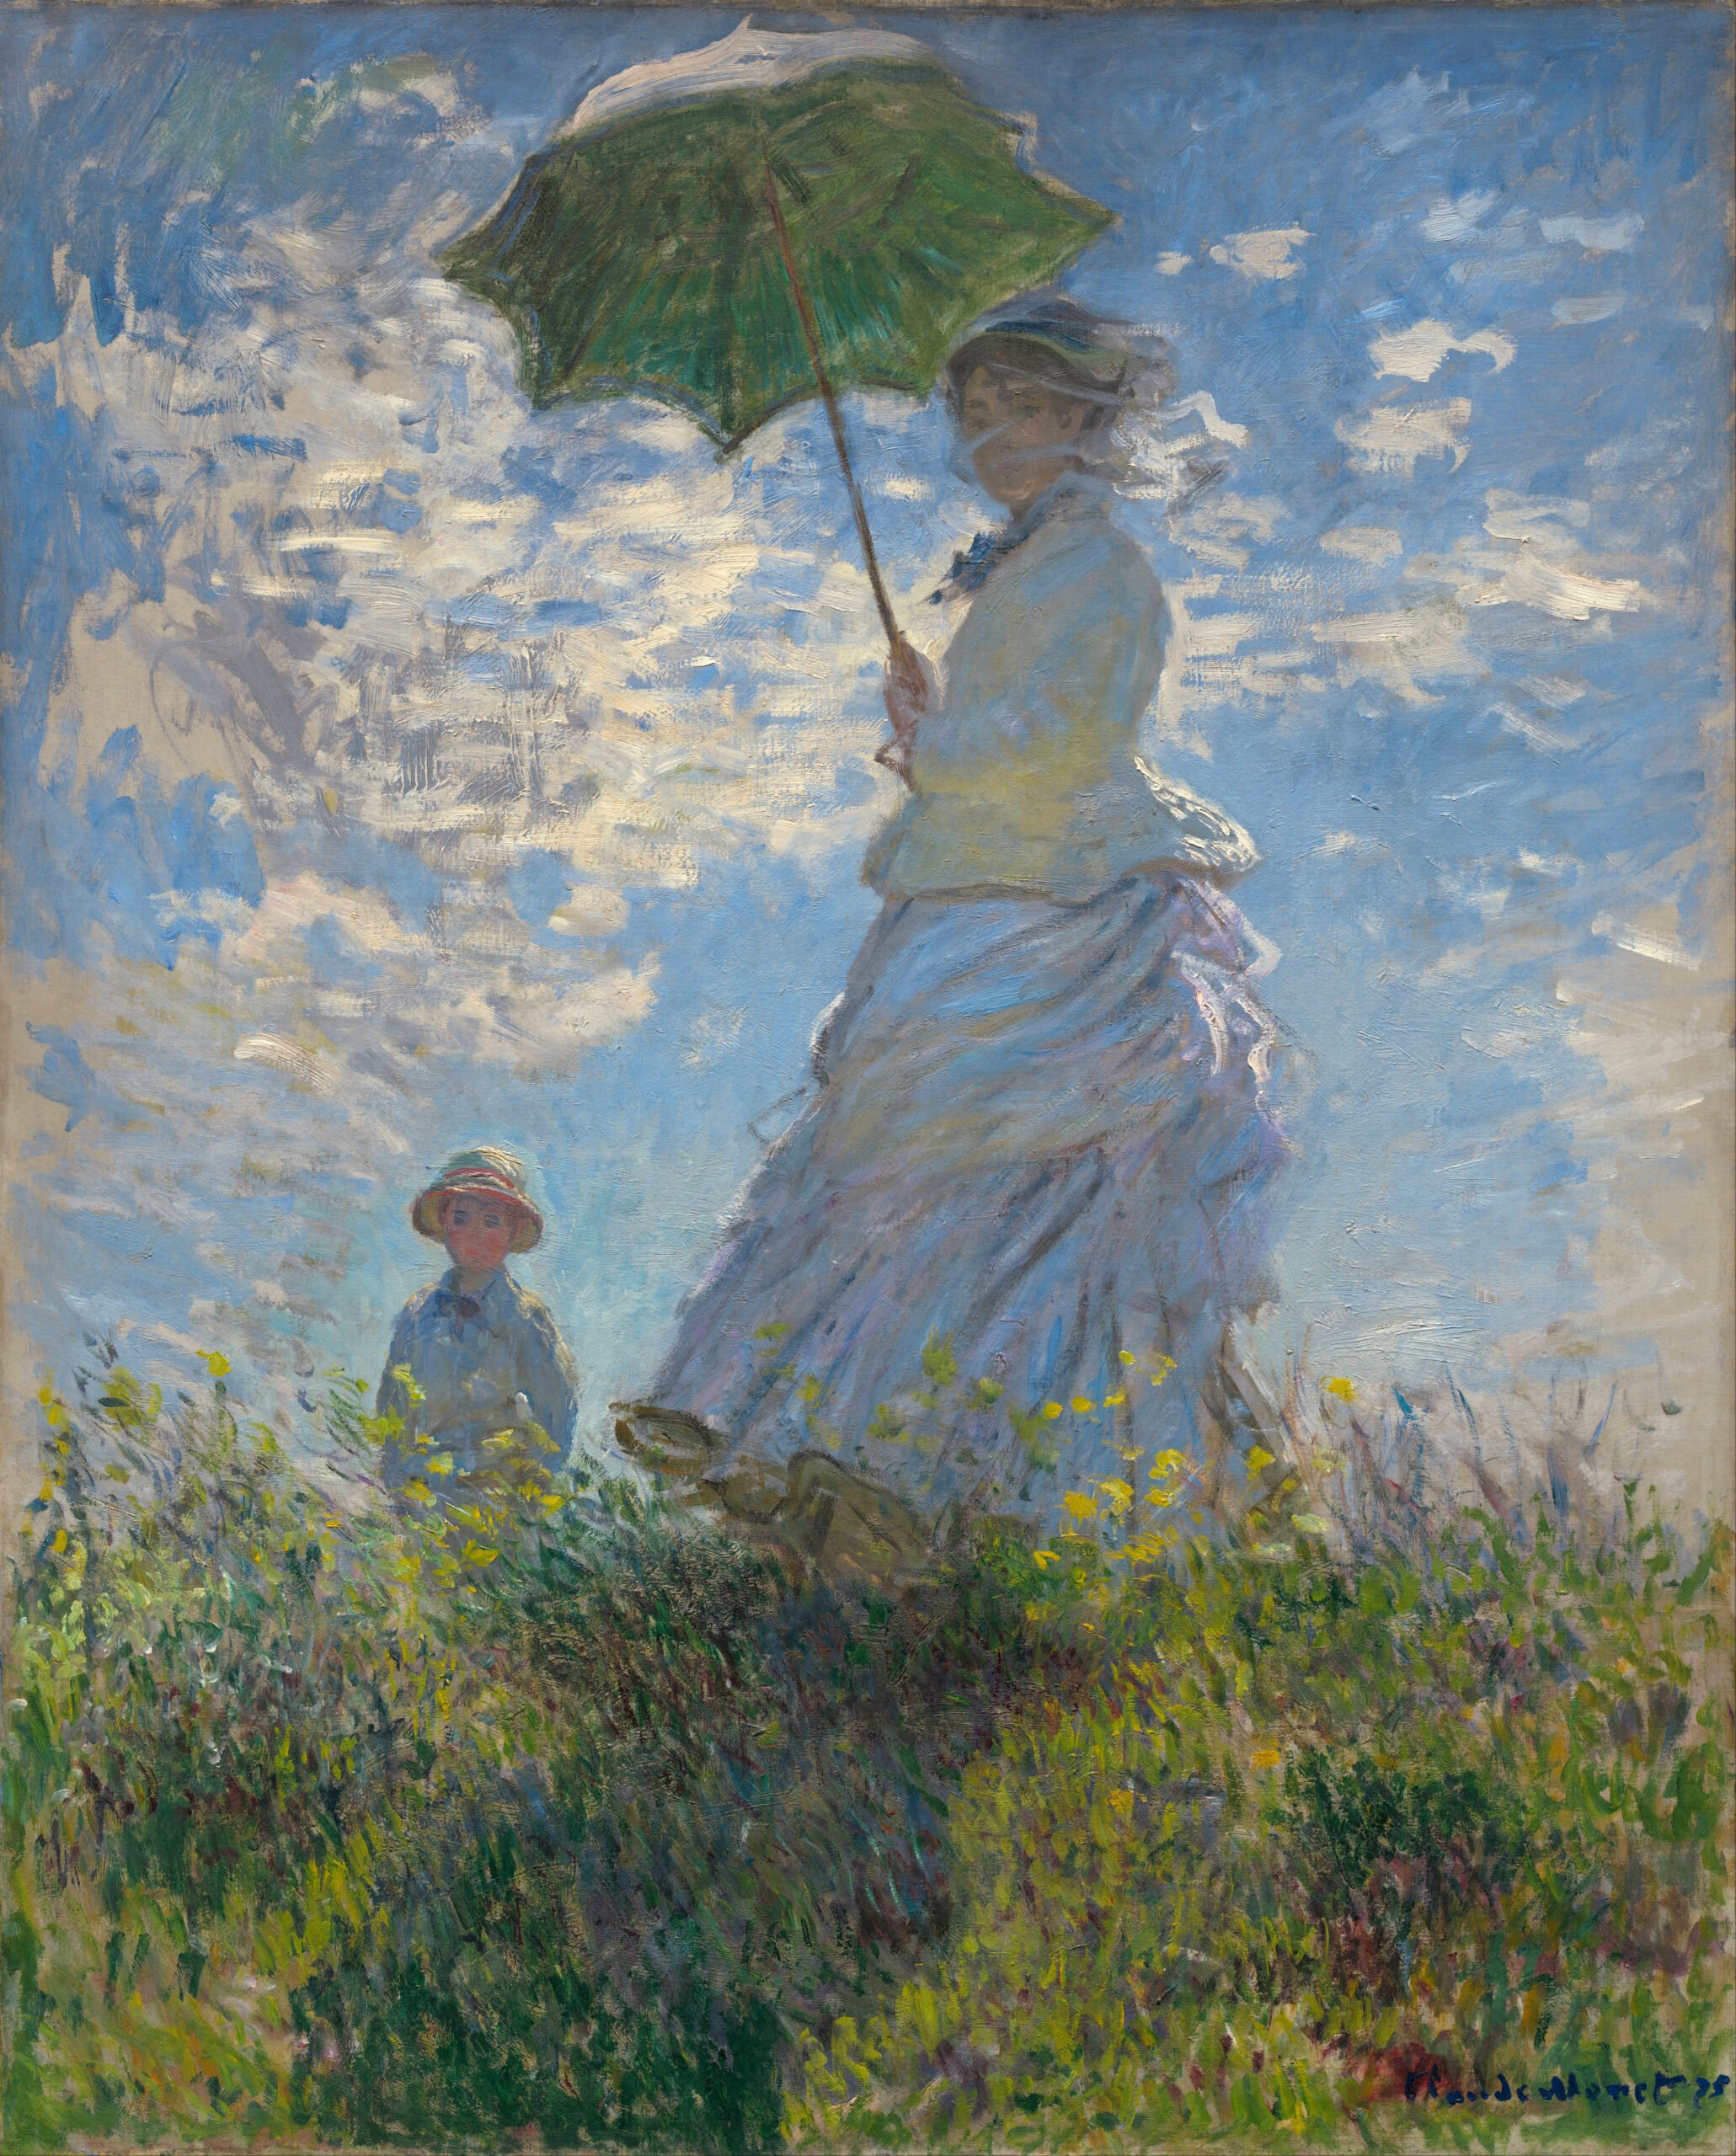 Claude_Monet_-_Woman_with_a_Parasol_-_Madame_Monet_and_Her_Son_-_Google_Art_Project